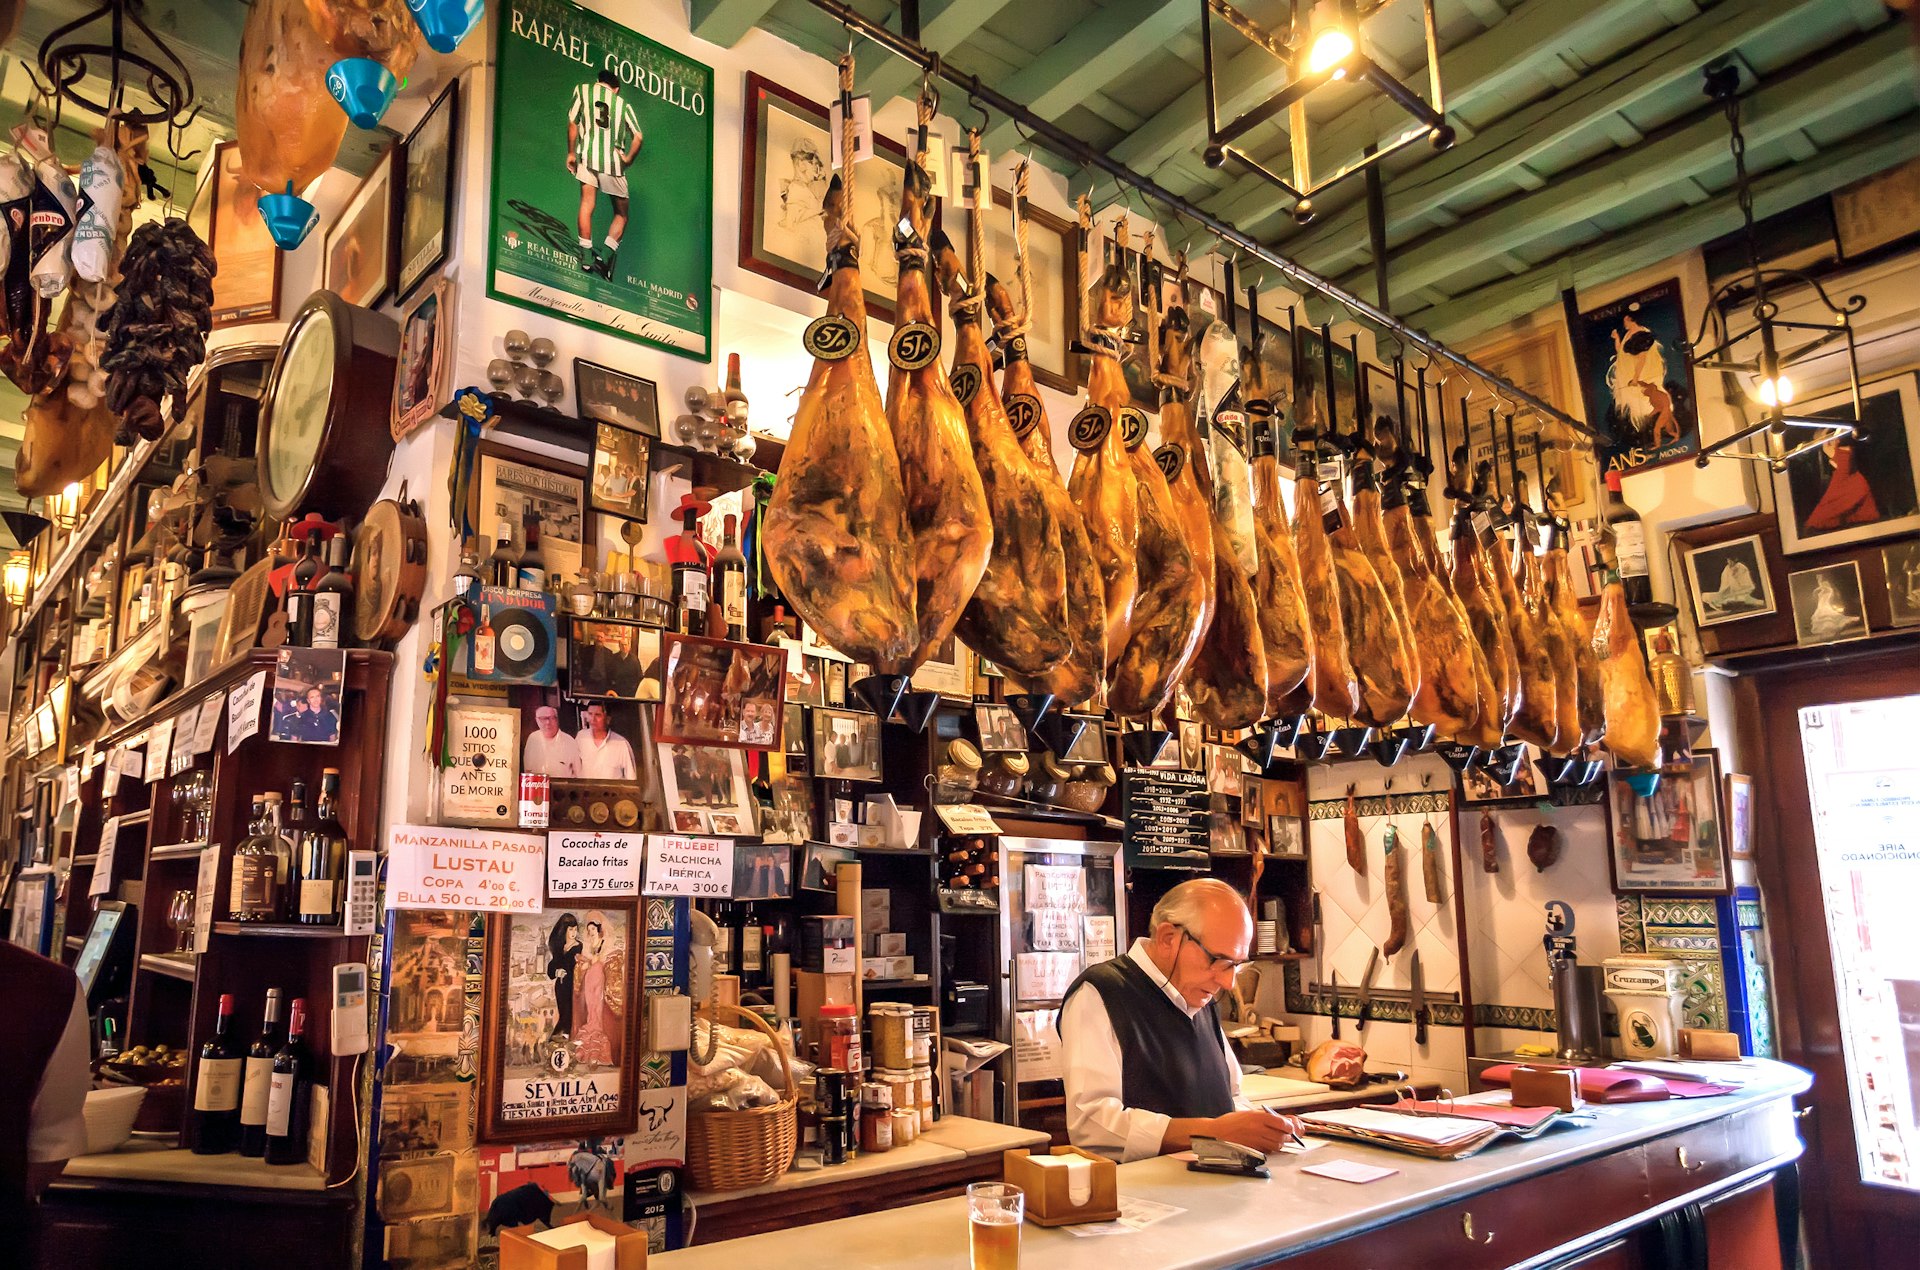 The interior of a traditional tapas bar in Seville with legs of jamon ham hanging around the bar